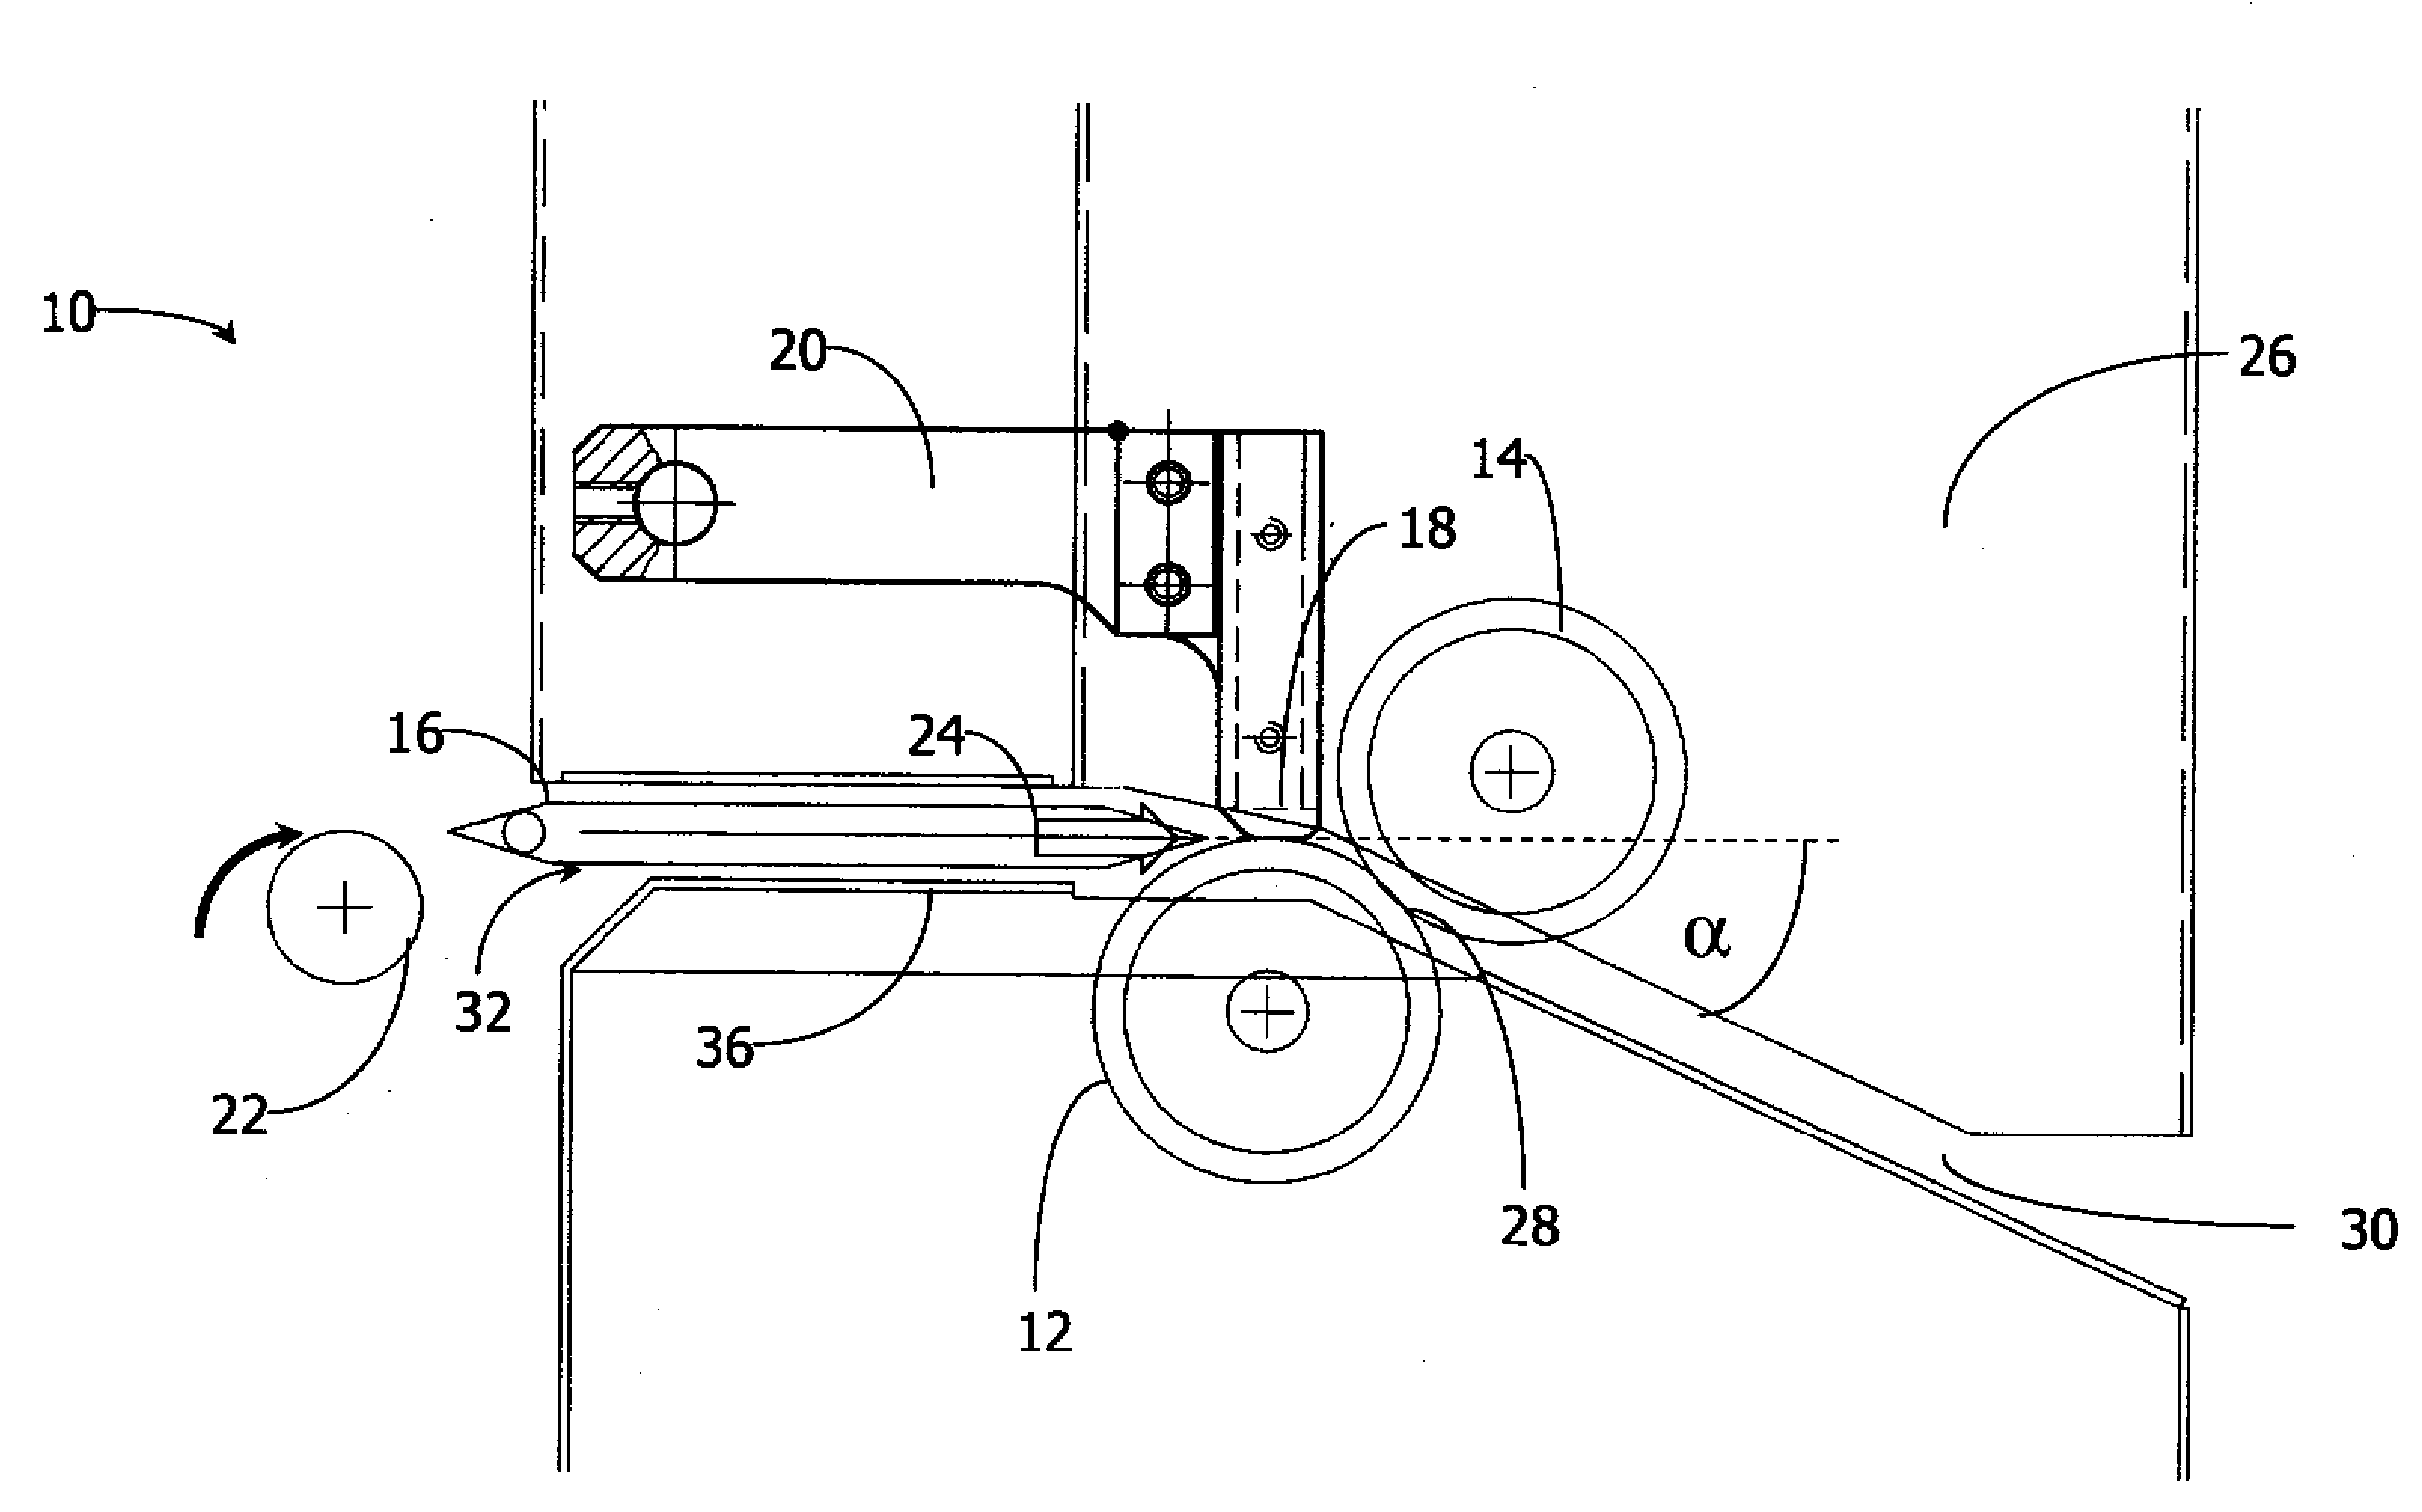 Apparatus and method for making gas-filled filling bodies